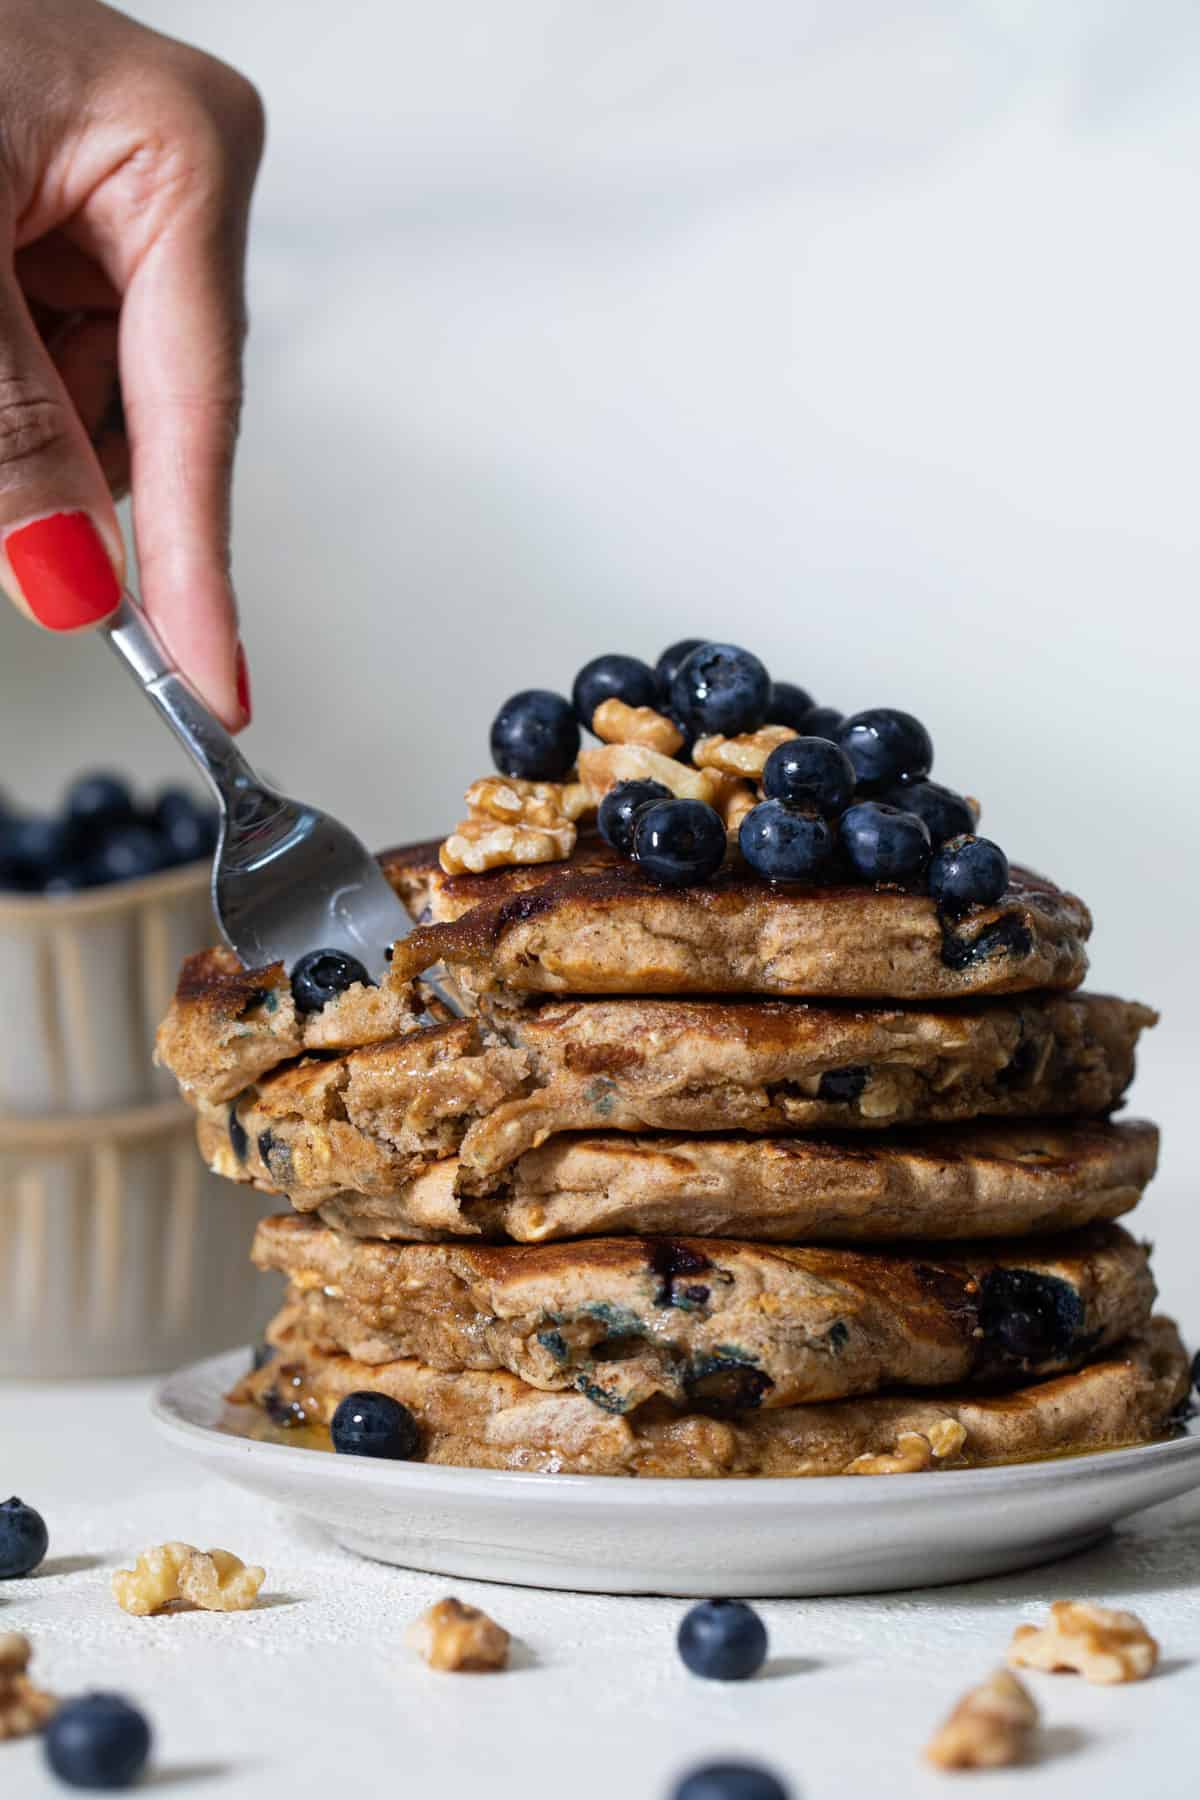 Woman using a fork to grab some Blueberry Whole Wheat Pancakes.